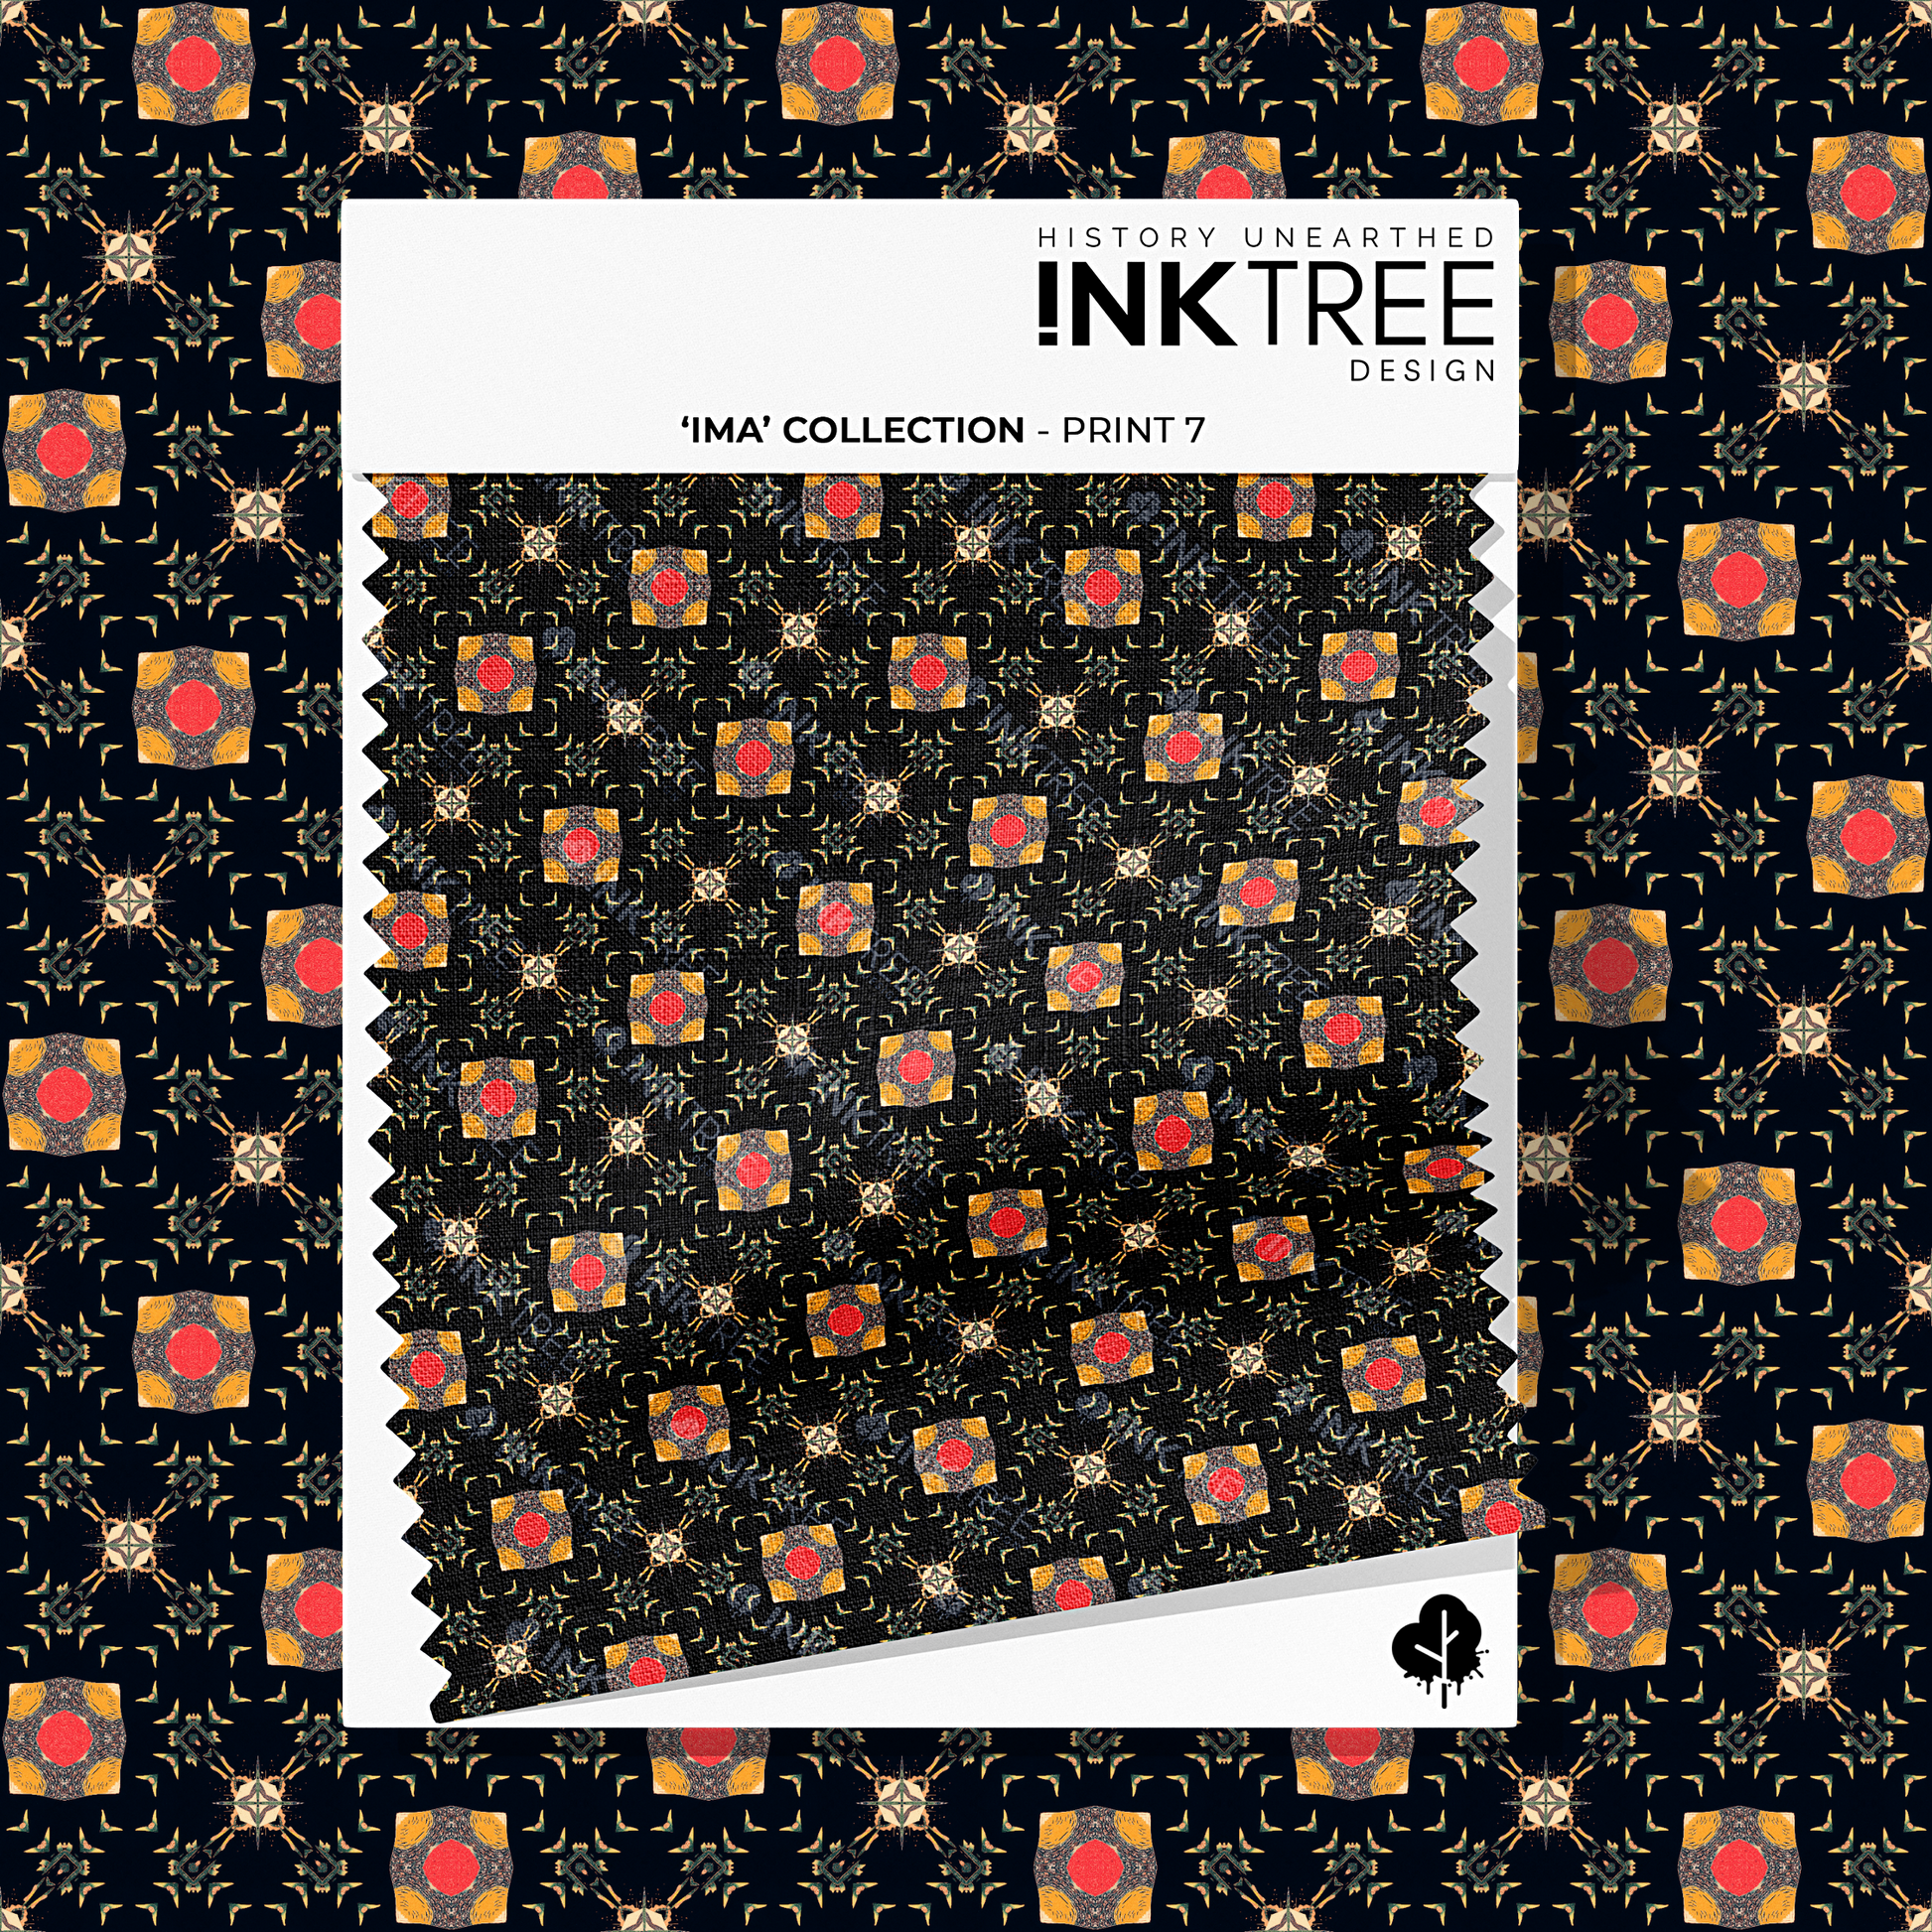 A white card fabric swatch with a gold, black, red, blue, green and white oriental looking pattern and ink tree design logo on it.  There is the same pattern on the background.